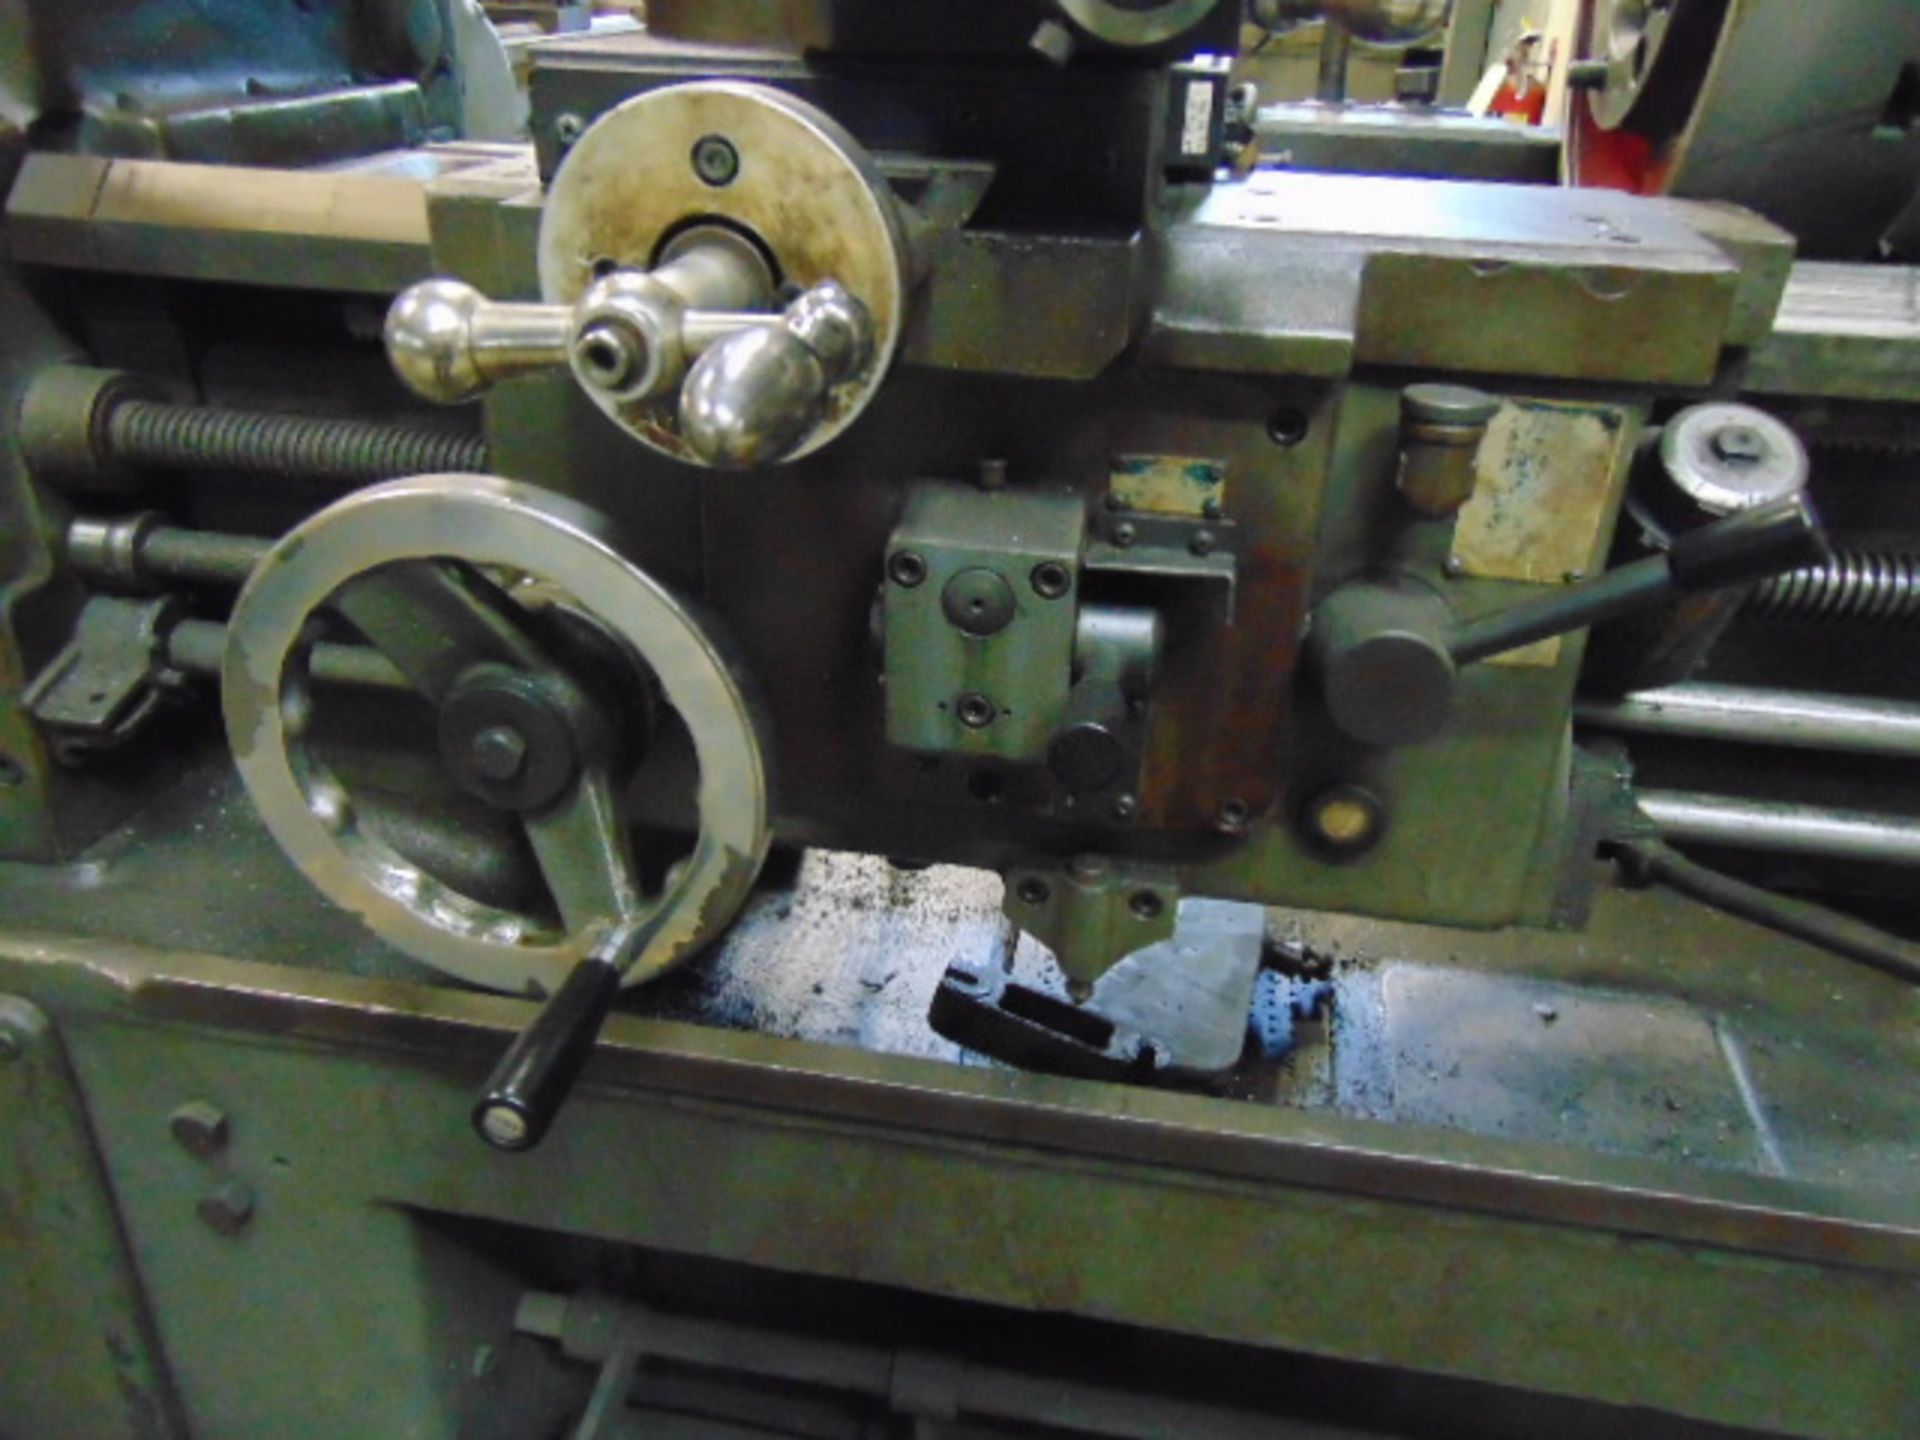 GAP BED ENGINE LATHE, WEBB 17” X 40” MDL. 17GX40, 5 HP motor, taper attach., 5 C lever activated - Image 6 of 15